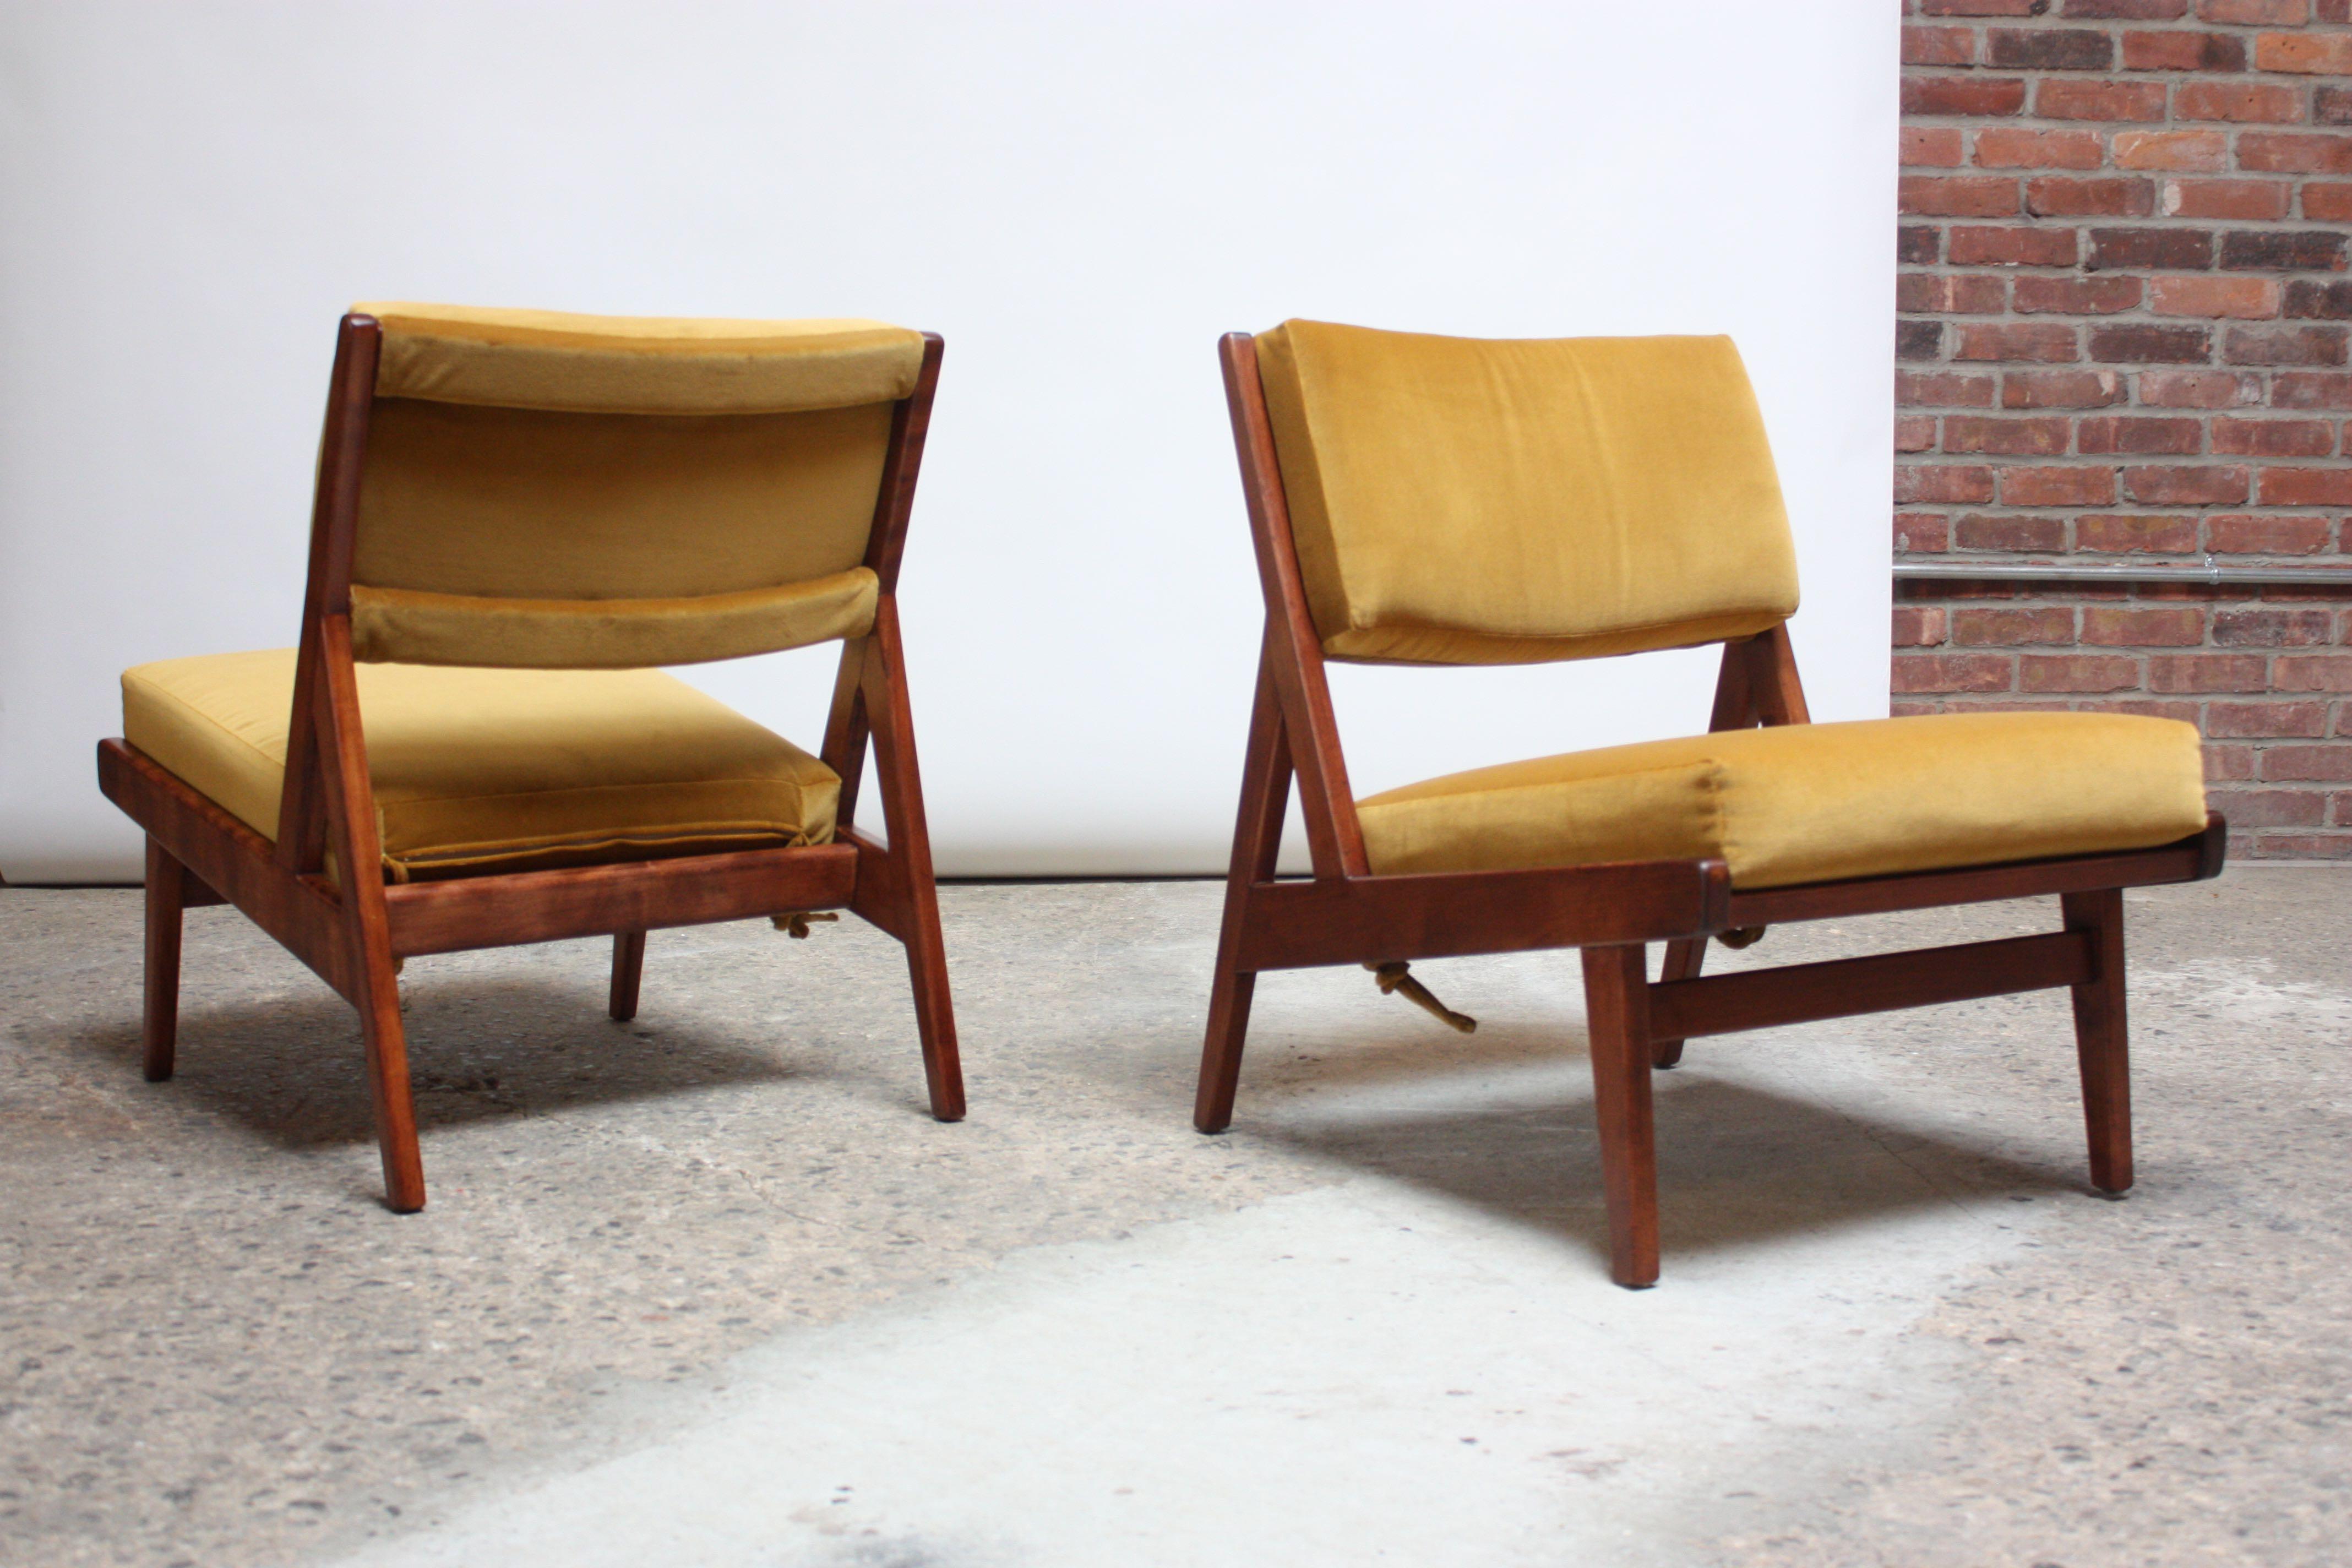 Early pair of Jens Risom for Jens Risom Design Inc. low lounge chairs model #U-431 (this chair first appeared in the 1955 Jens Risom Design Inc. catalog and was already out of production by 1959). Composed of armless, walnut frames boasting sharp